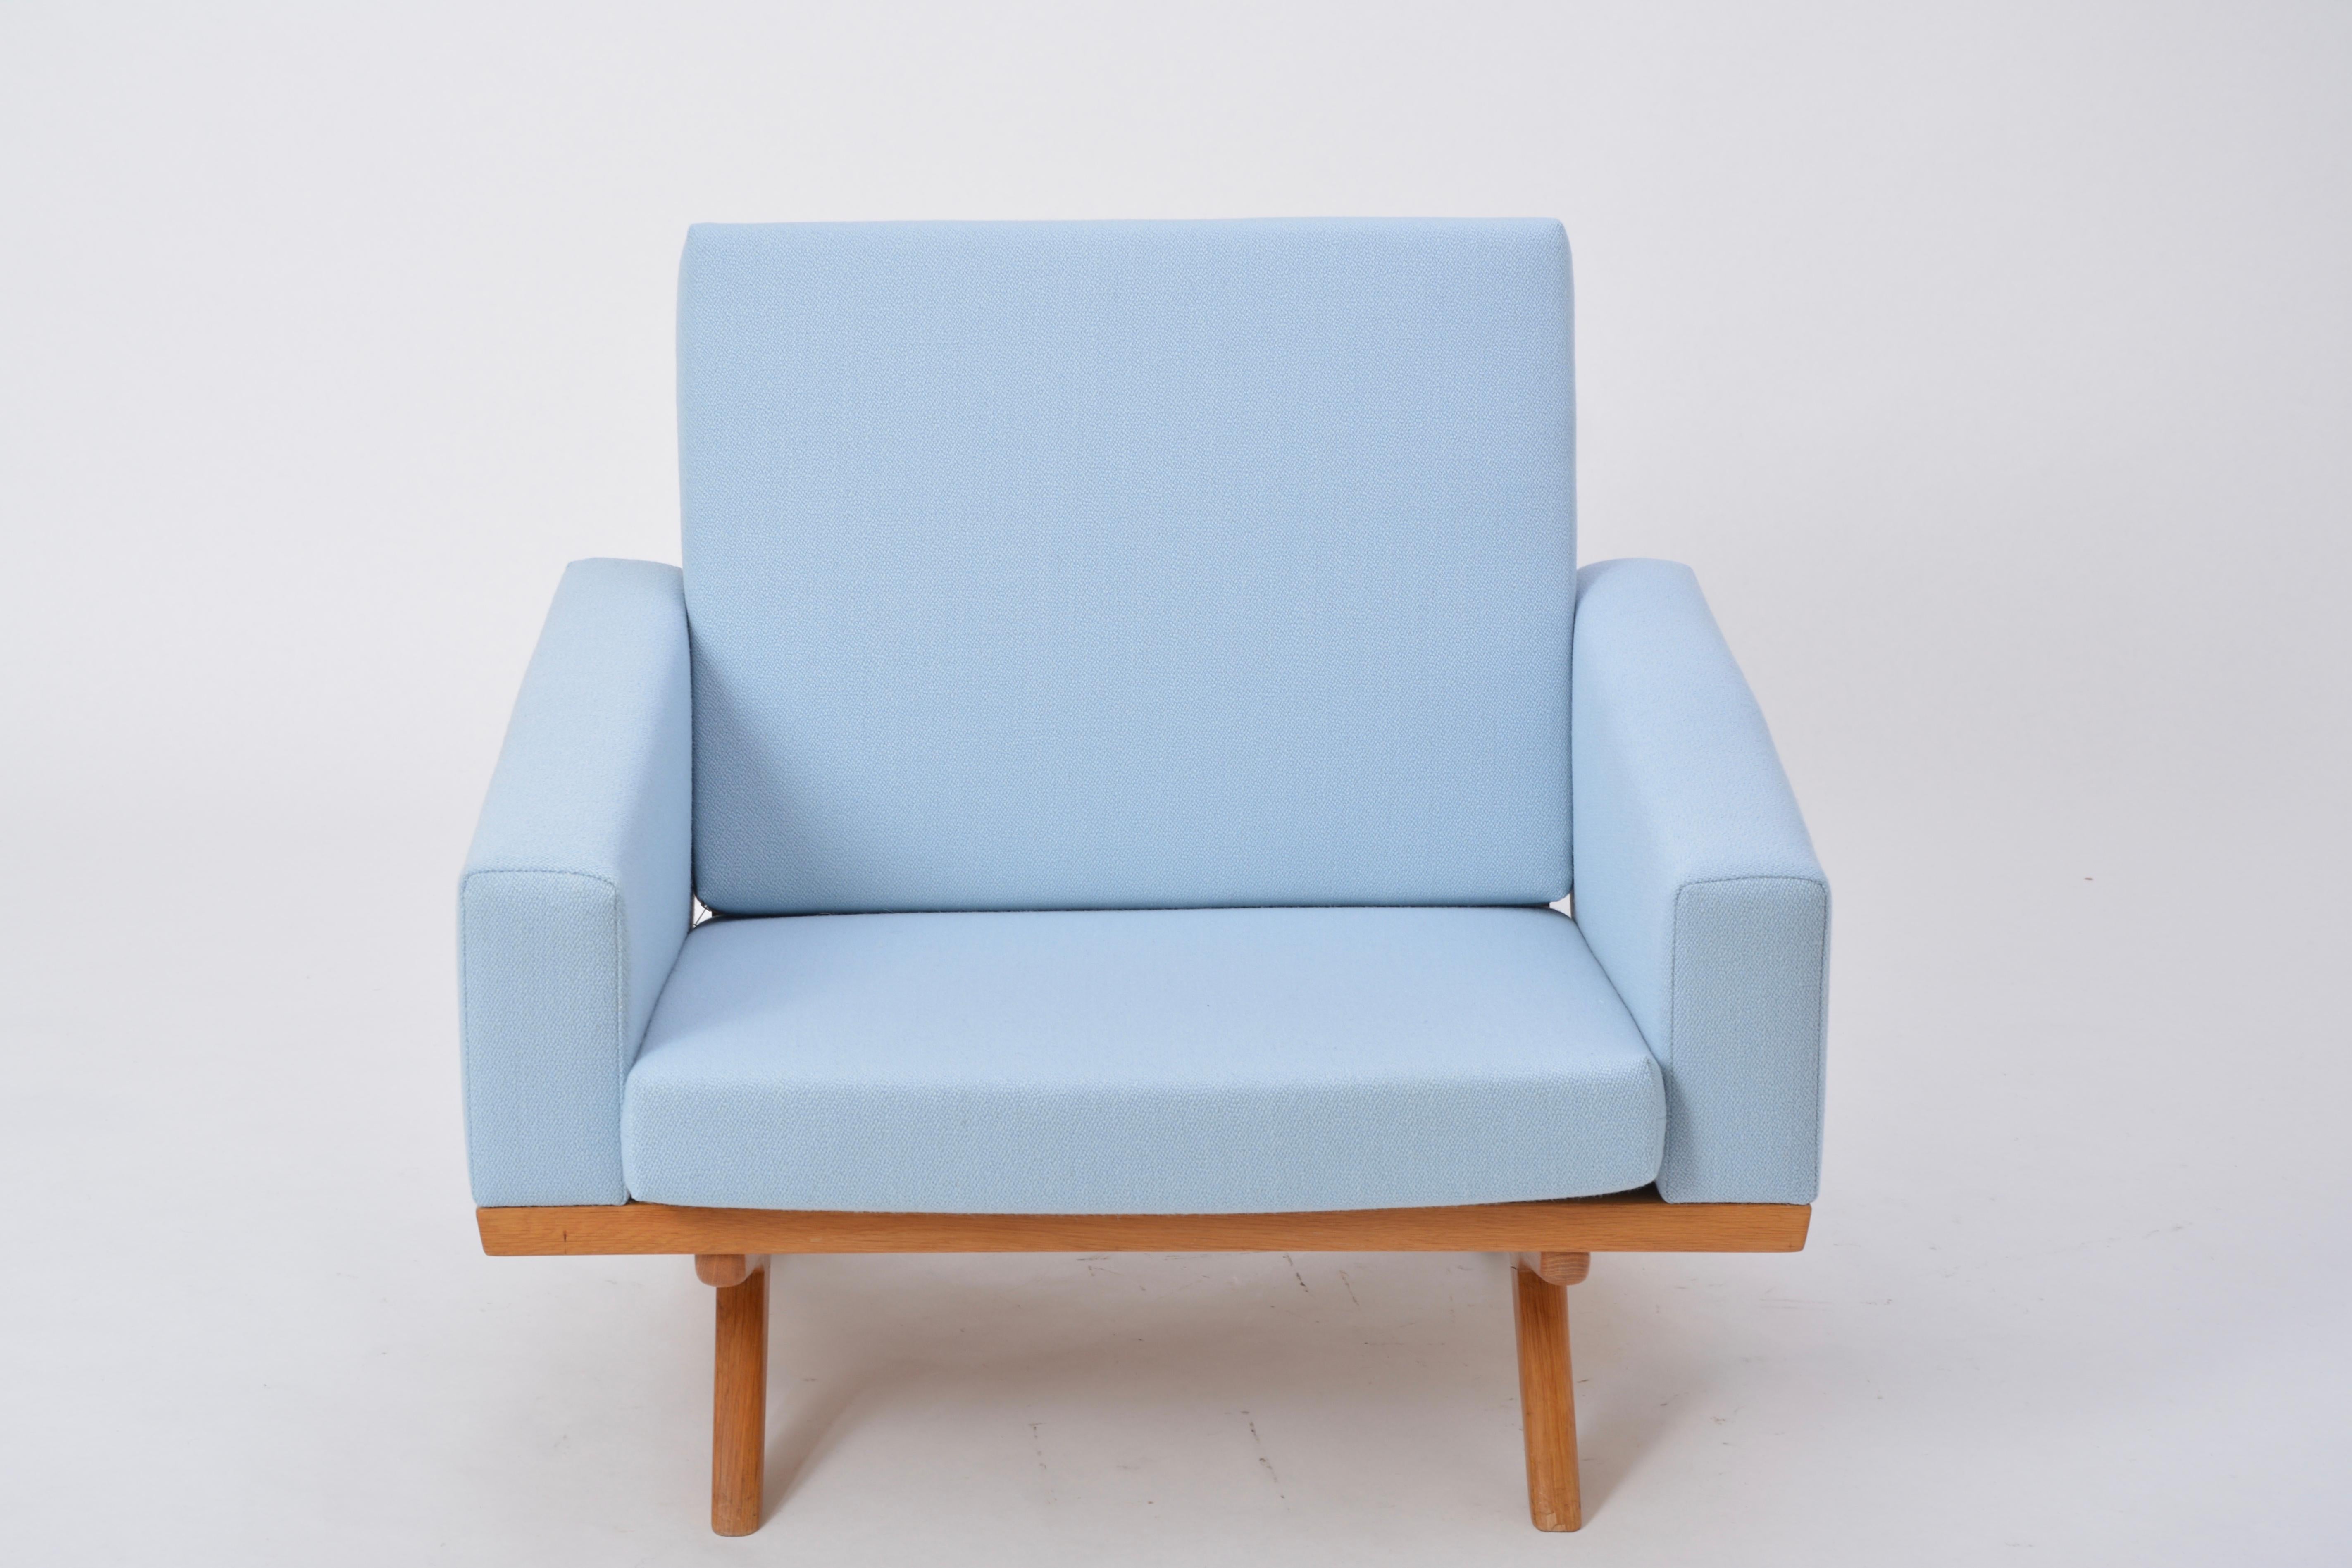 Danish Mid-Century Modern armchair by Georg Thams for Vejen Polstermøbelfabrik

This armchair was designed by Georg Thams in 1964 and produced by AS Vejen Møbelfabrik in Denmark. The chair is made of oak, back cushion and seat cushion are loose. The